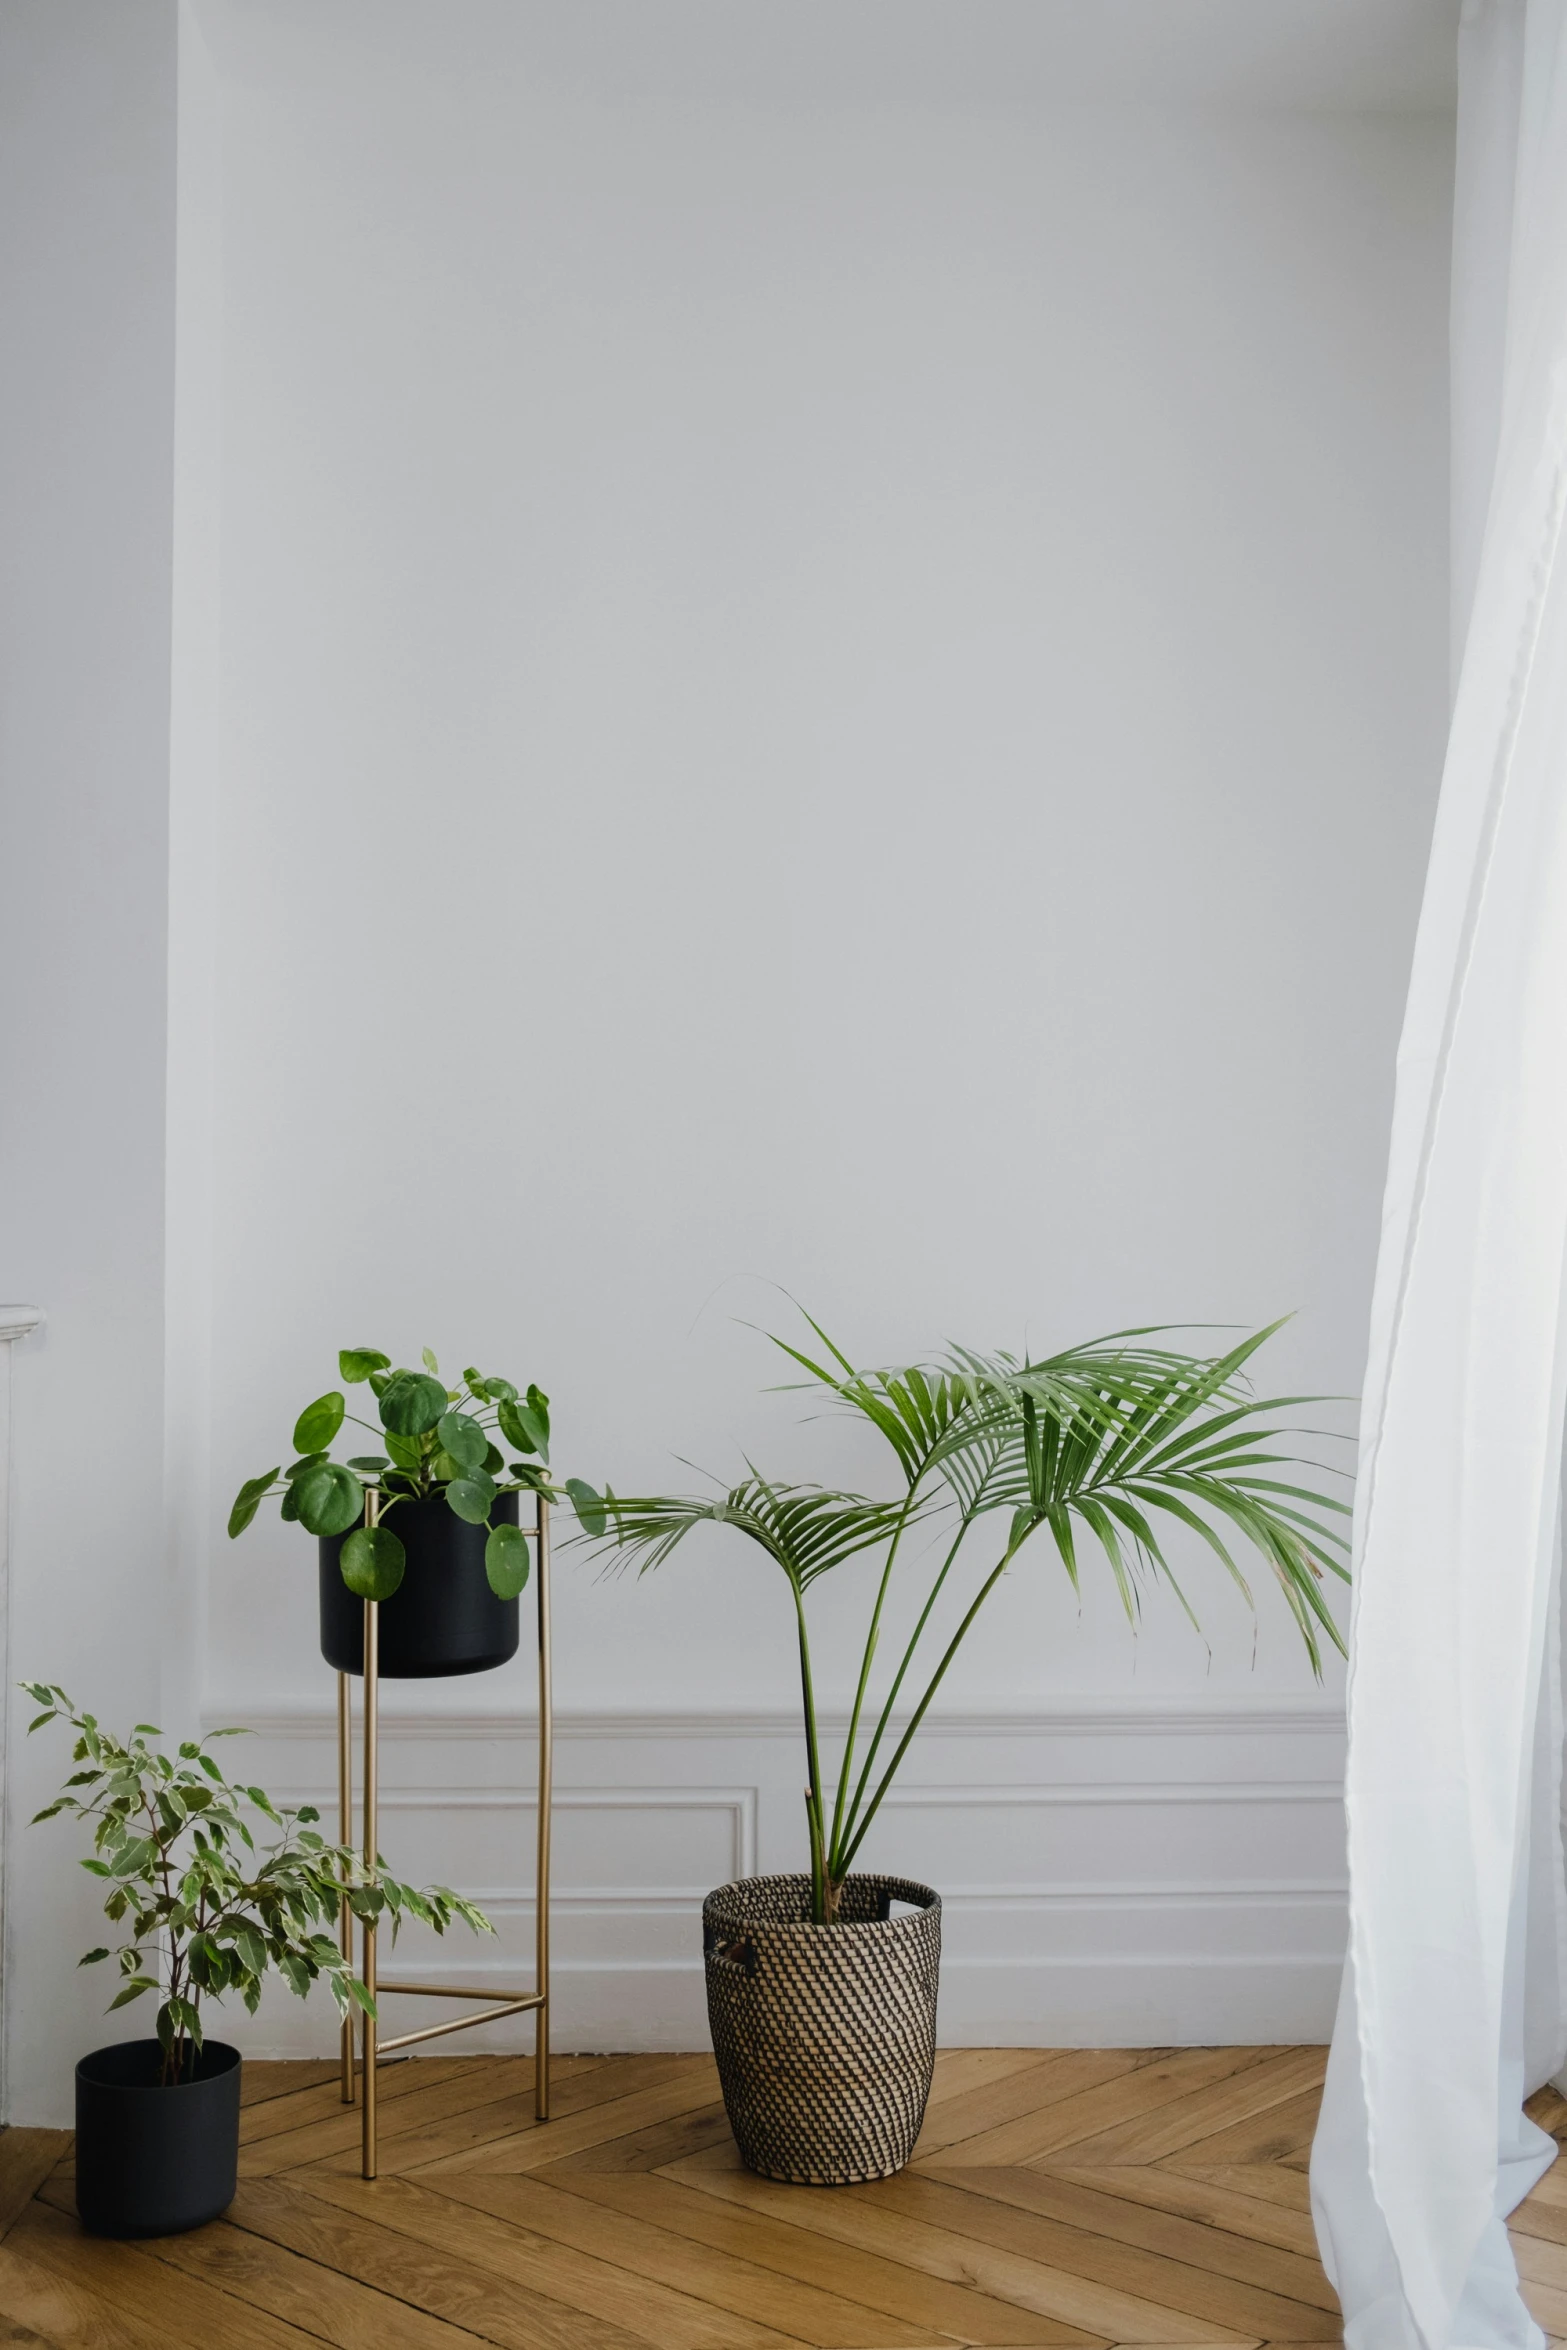 potted plants sit on a stand in an empty room